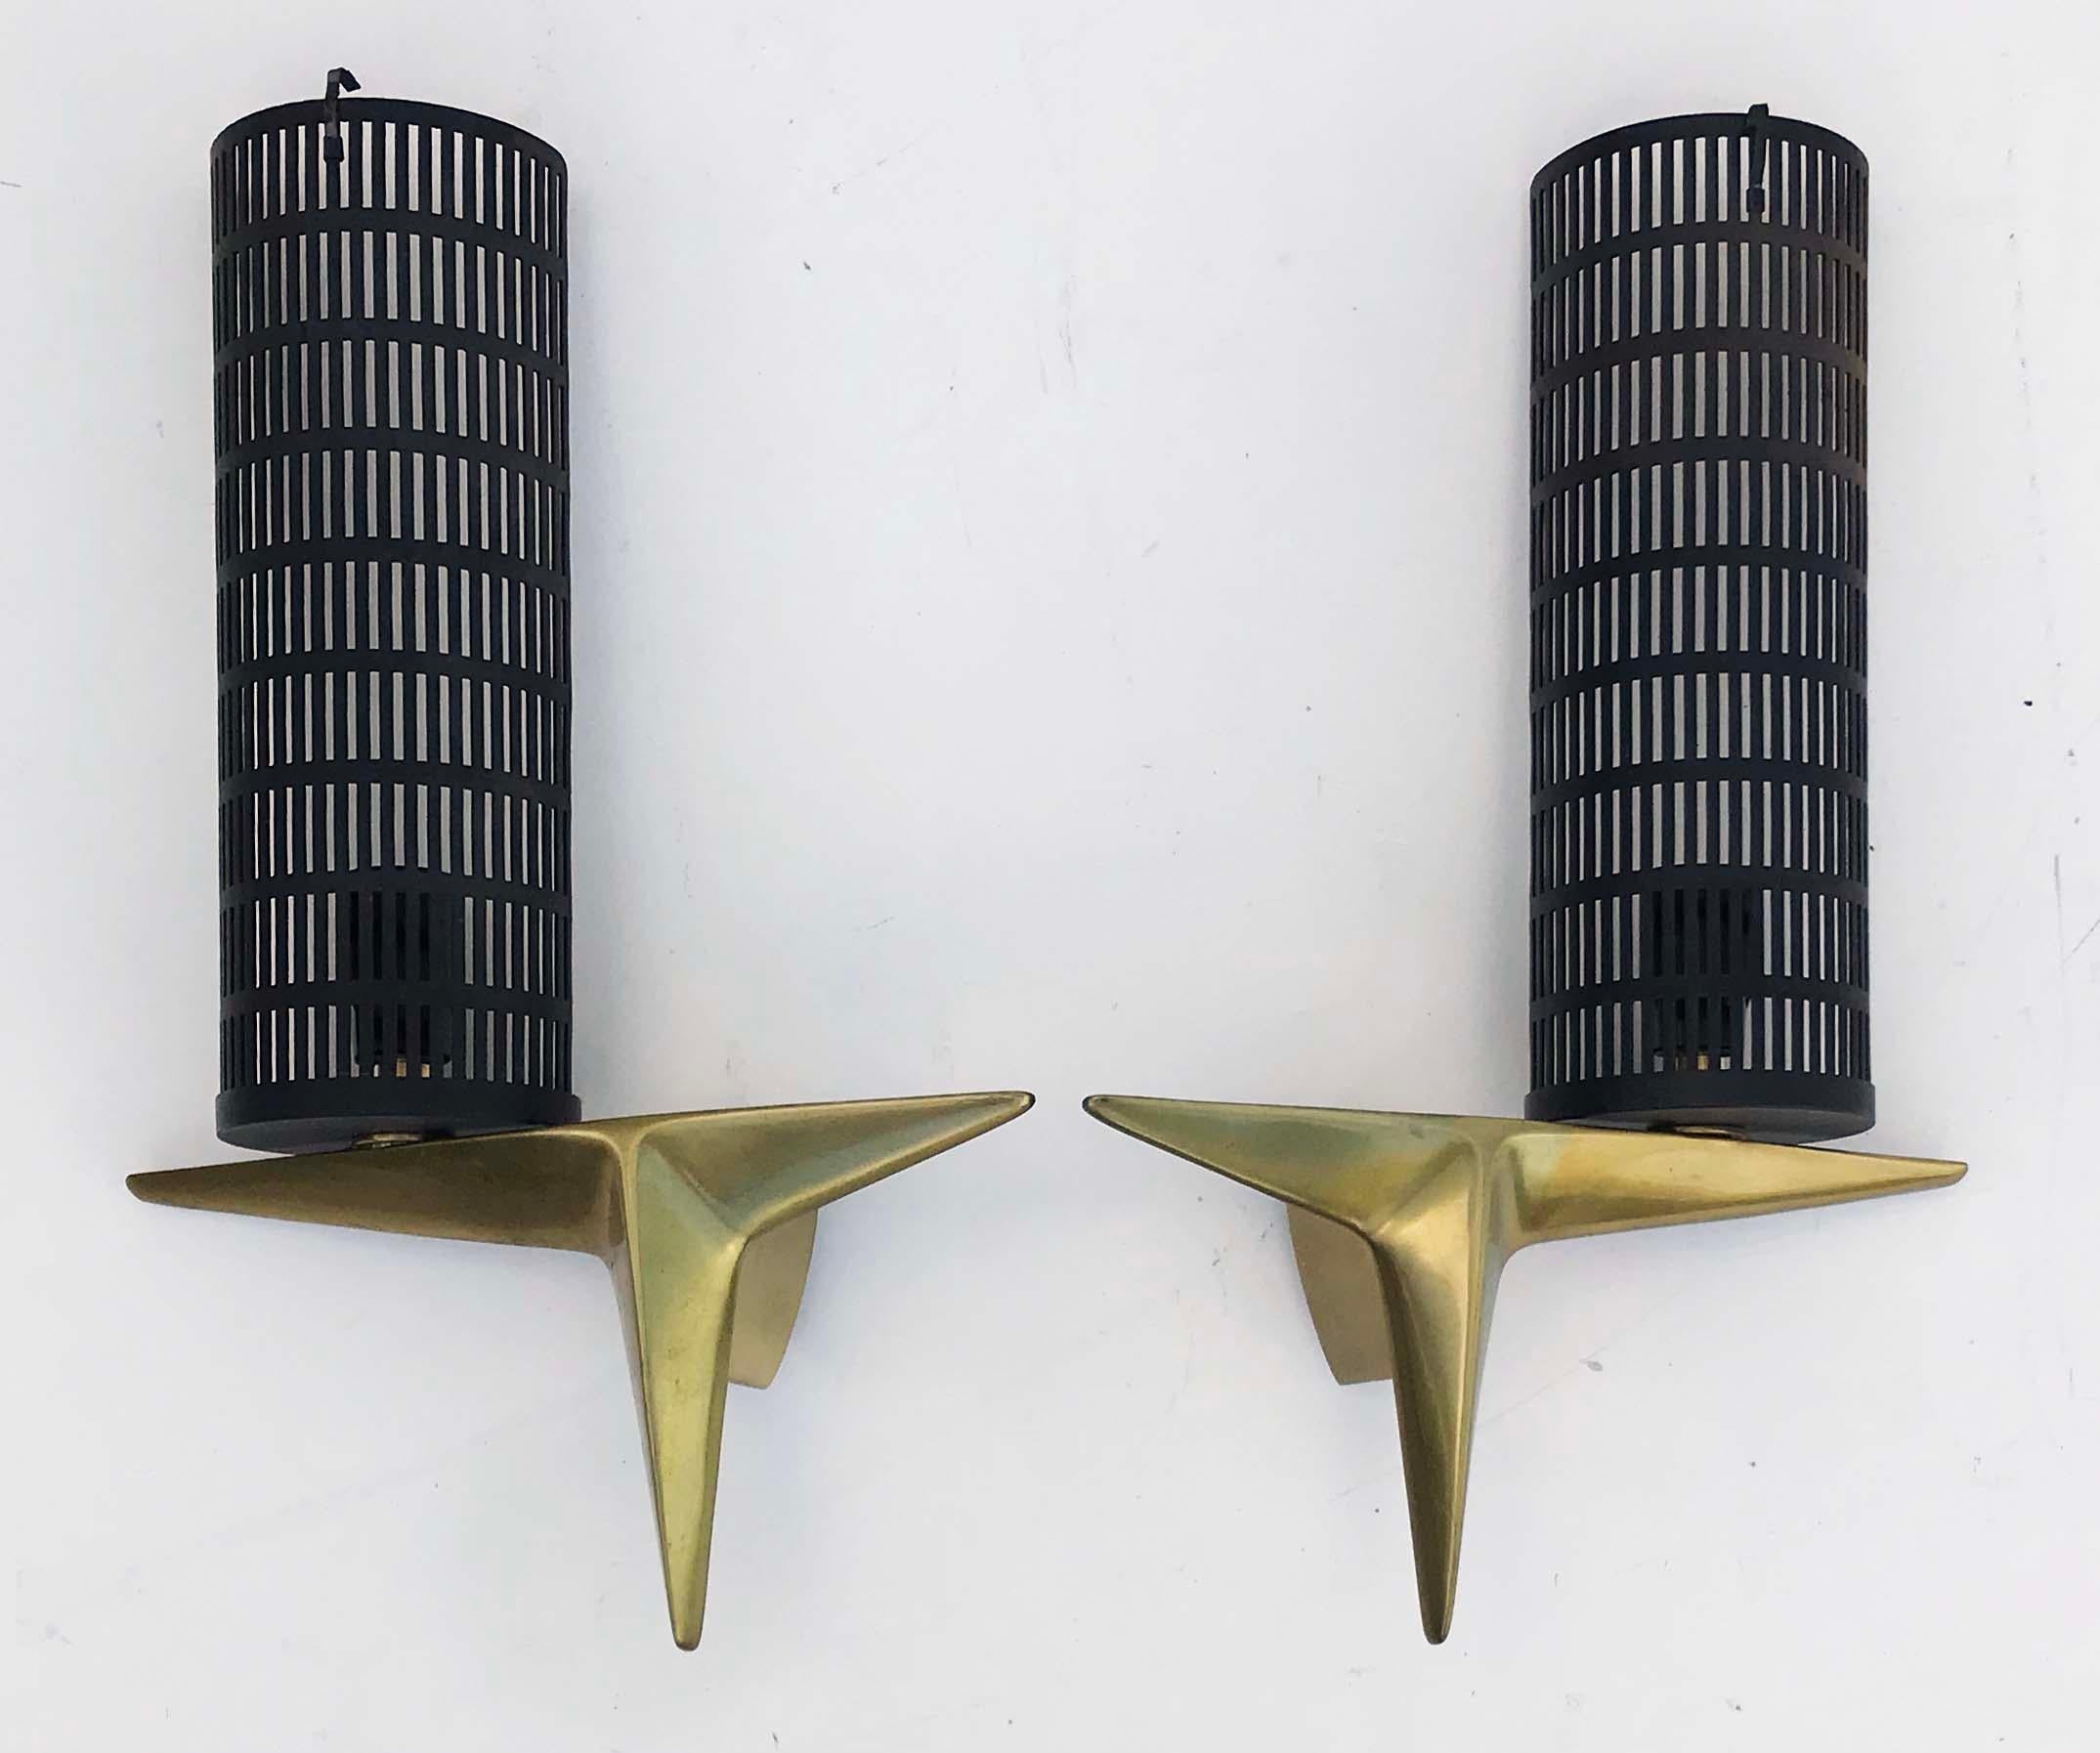 Superb pair of Maison Arlus sconces , rotating metal shade.
US rewired and in working condition.
Back plate : 3